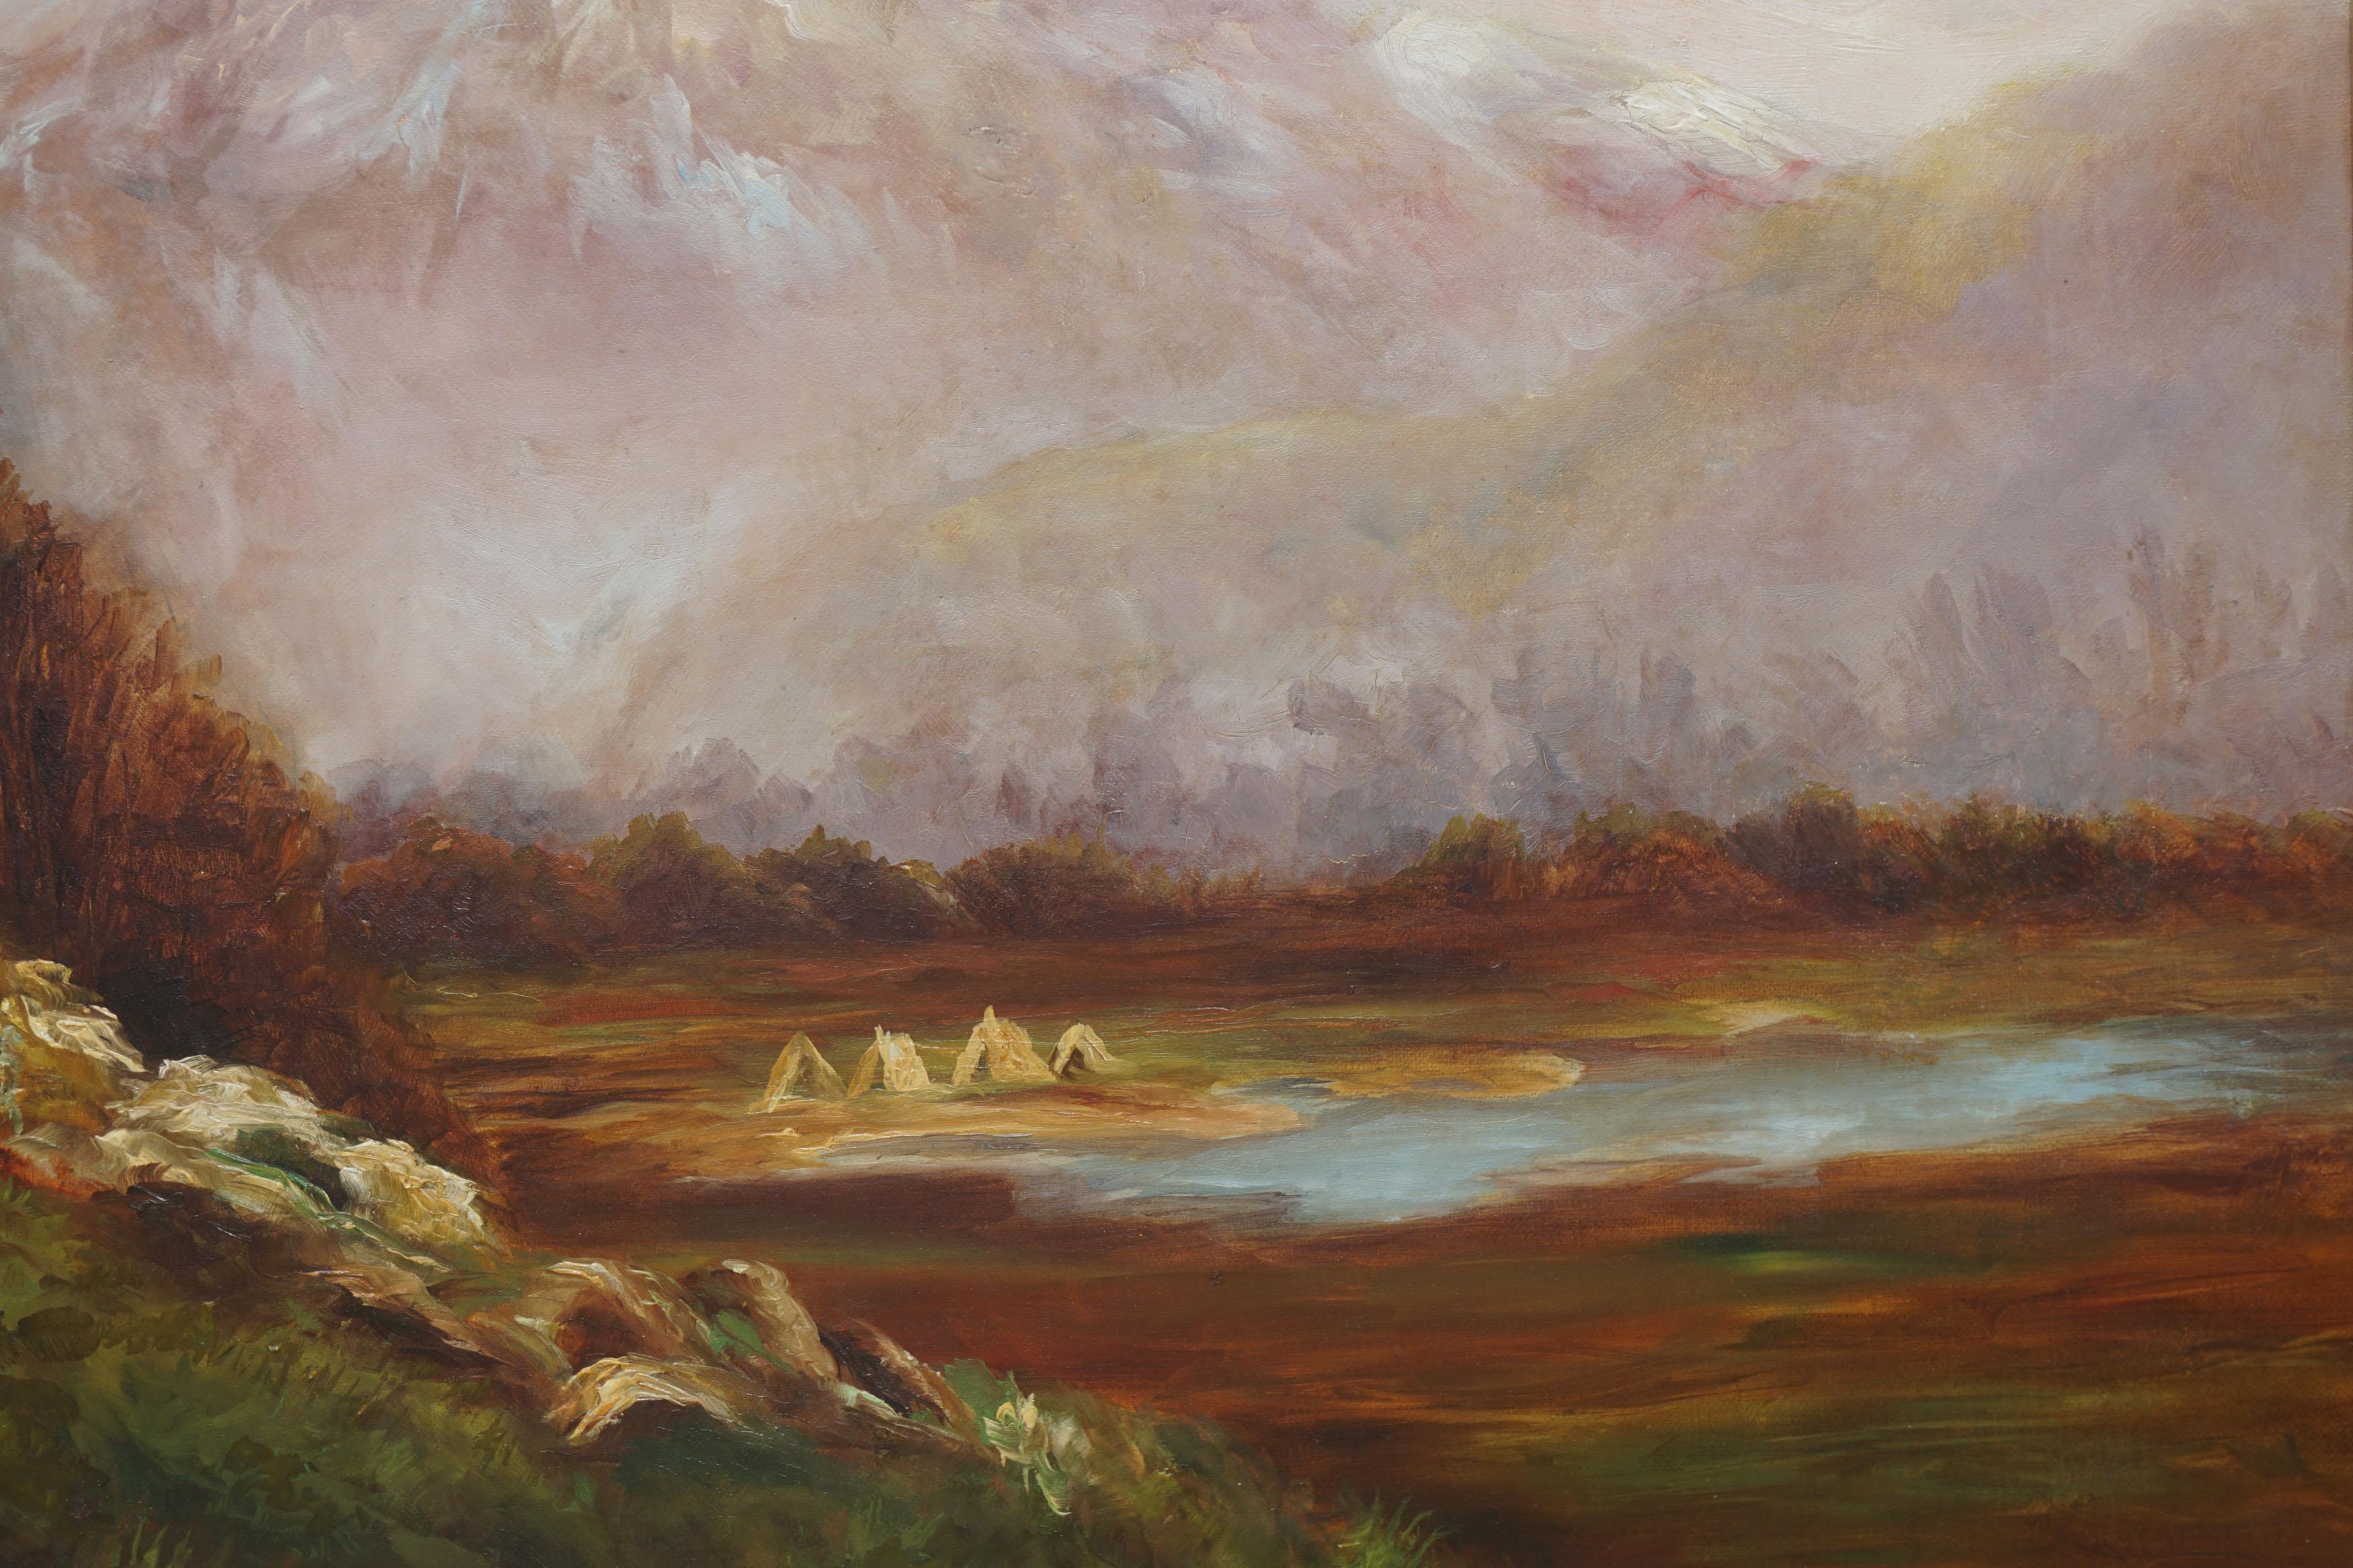 Mount Baker with Encampment - In Style of Albert Bierstadt - Hudson River School Painting by Unknown